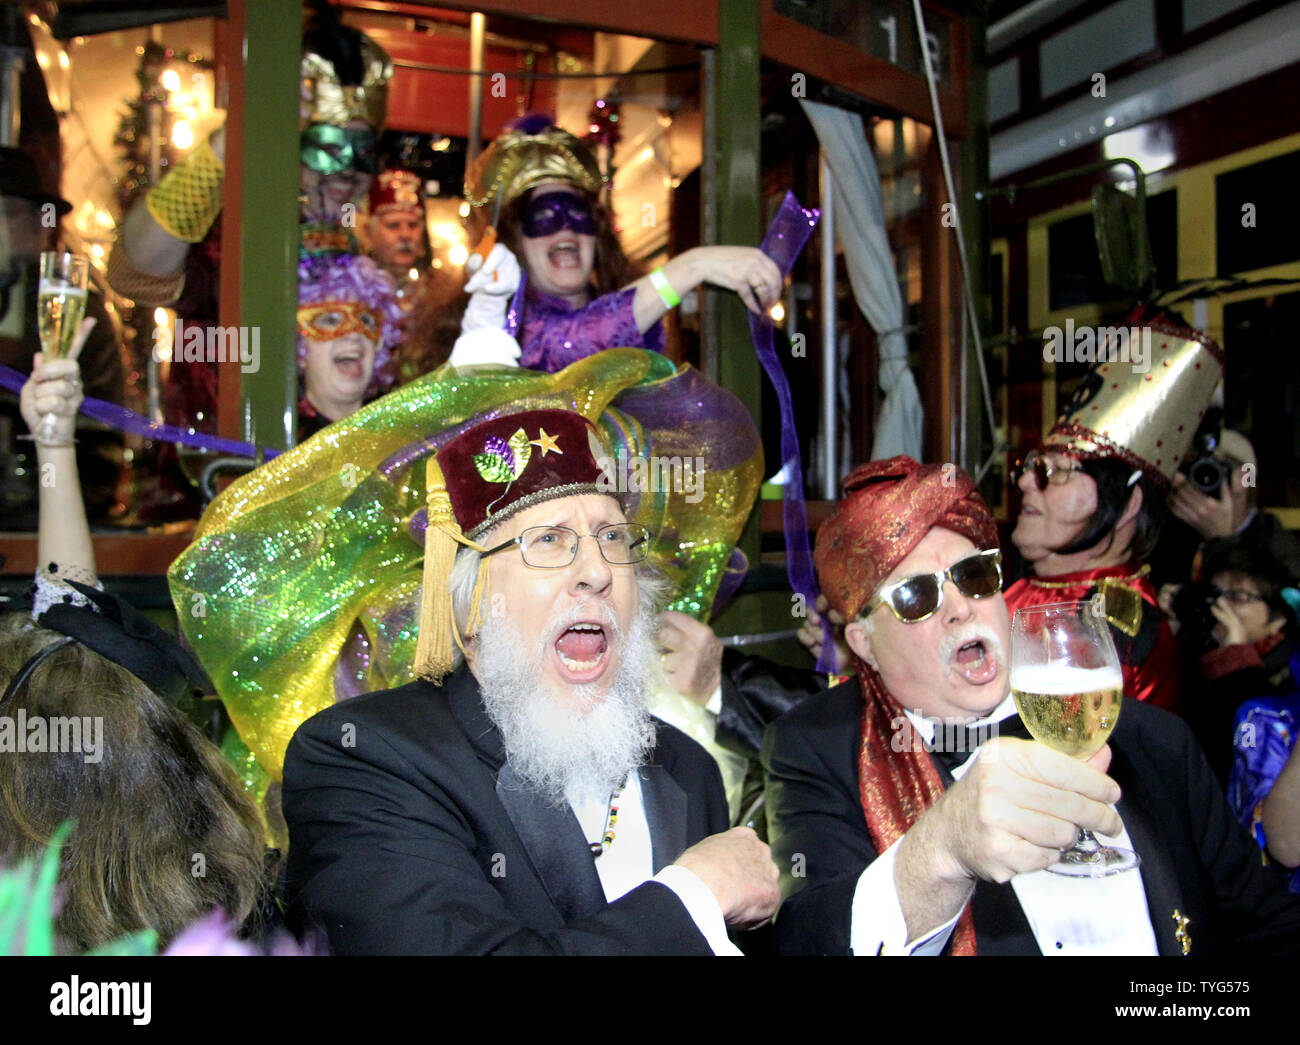 Member of the Phunny Phorty Phellows, 'The Heralds of Carnival,' celebrates the start of the 2016 Carnival season in New Orleans with a streetcar ride down St. Charles Avenue on Twelfth Night, January 6, 2016.The Mardi Gras organization is known for its satirical parade, and members' costumes often reflect topical themes.  Photo by AJ Sisco/UPI Stock Photo